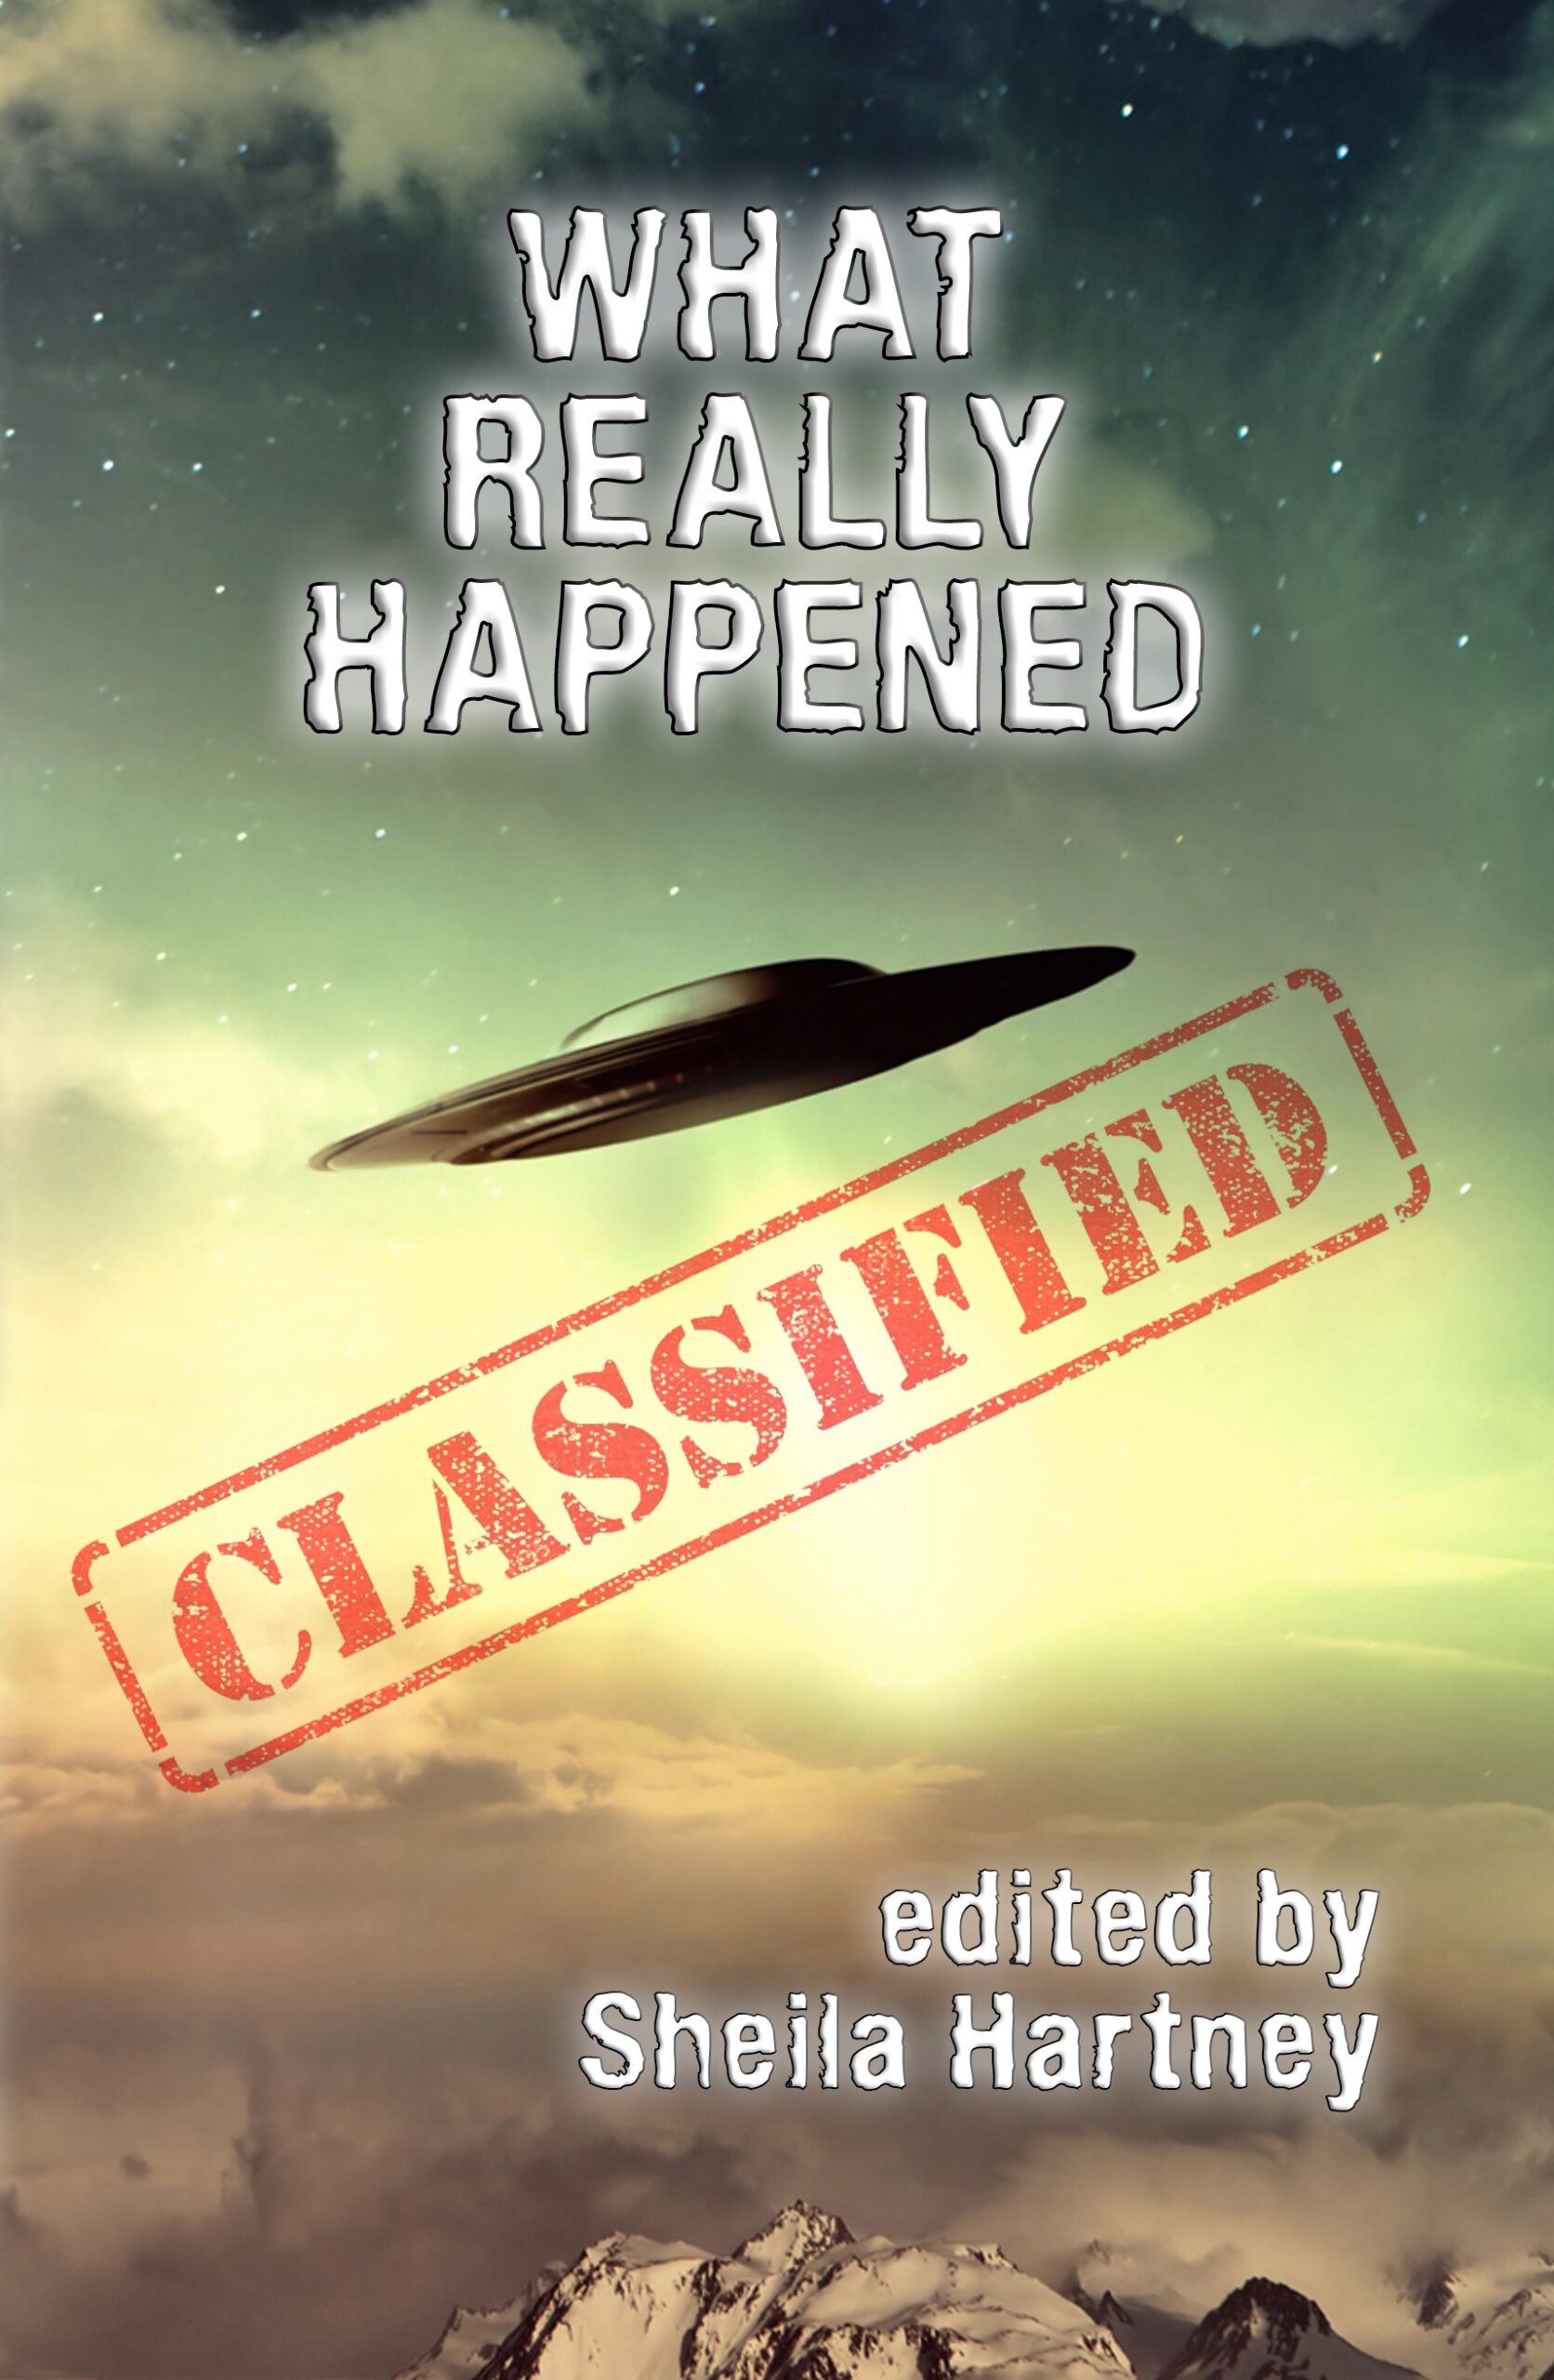 What Really Happened? is out now!